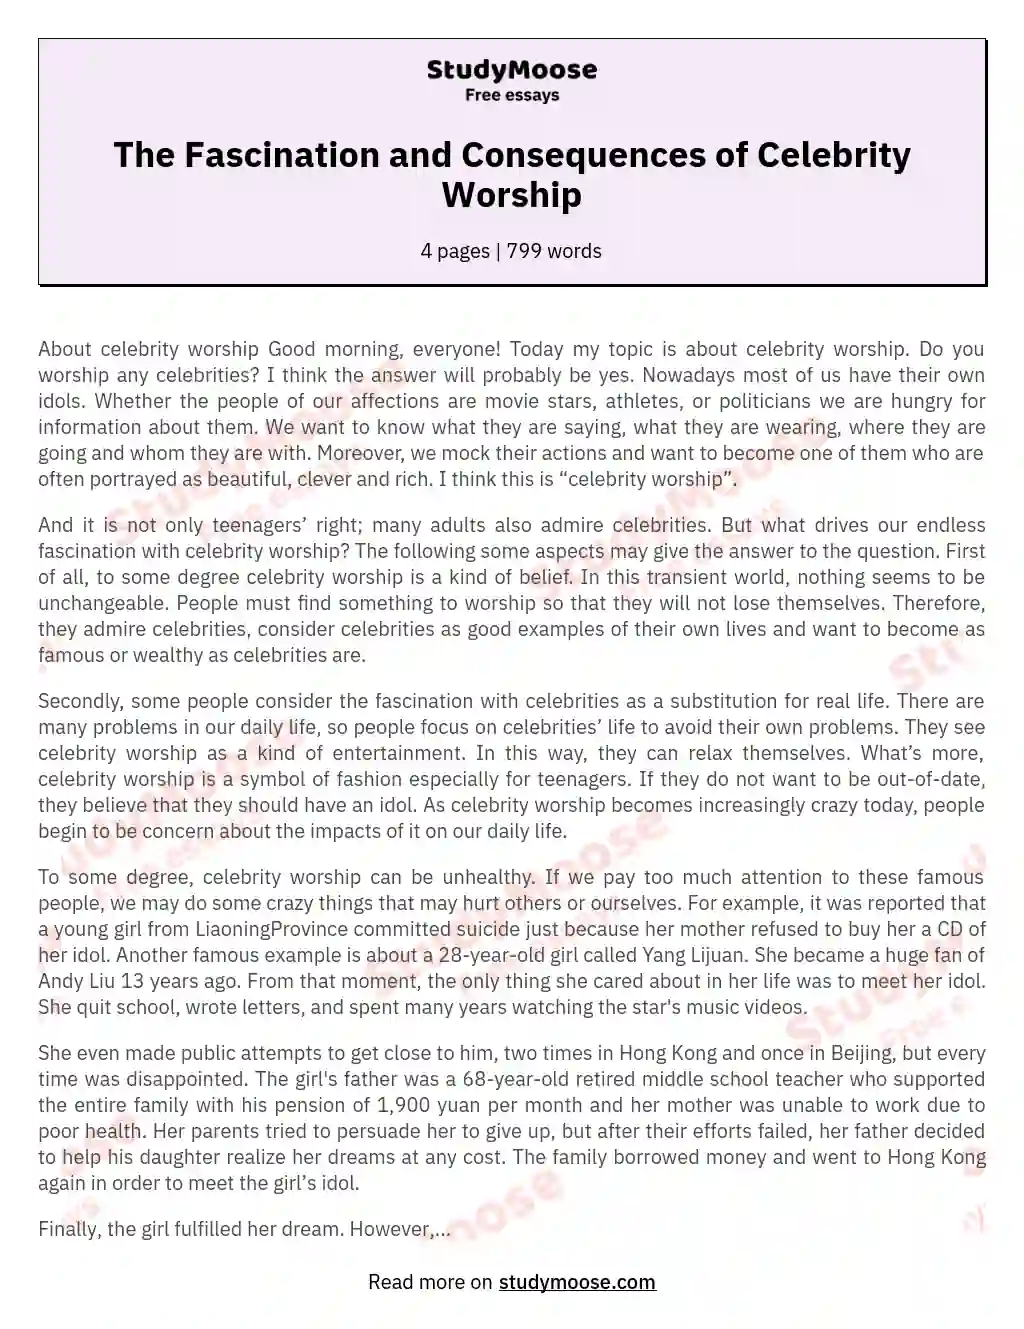 The Fascination and Consequences of Celebrity Worship essay